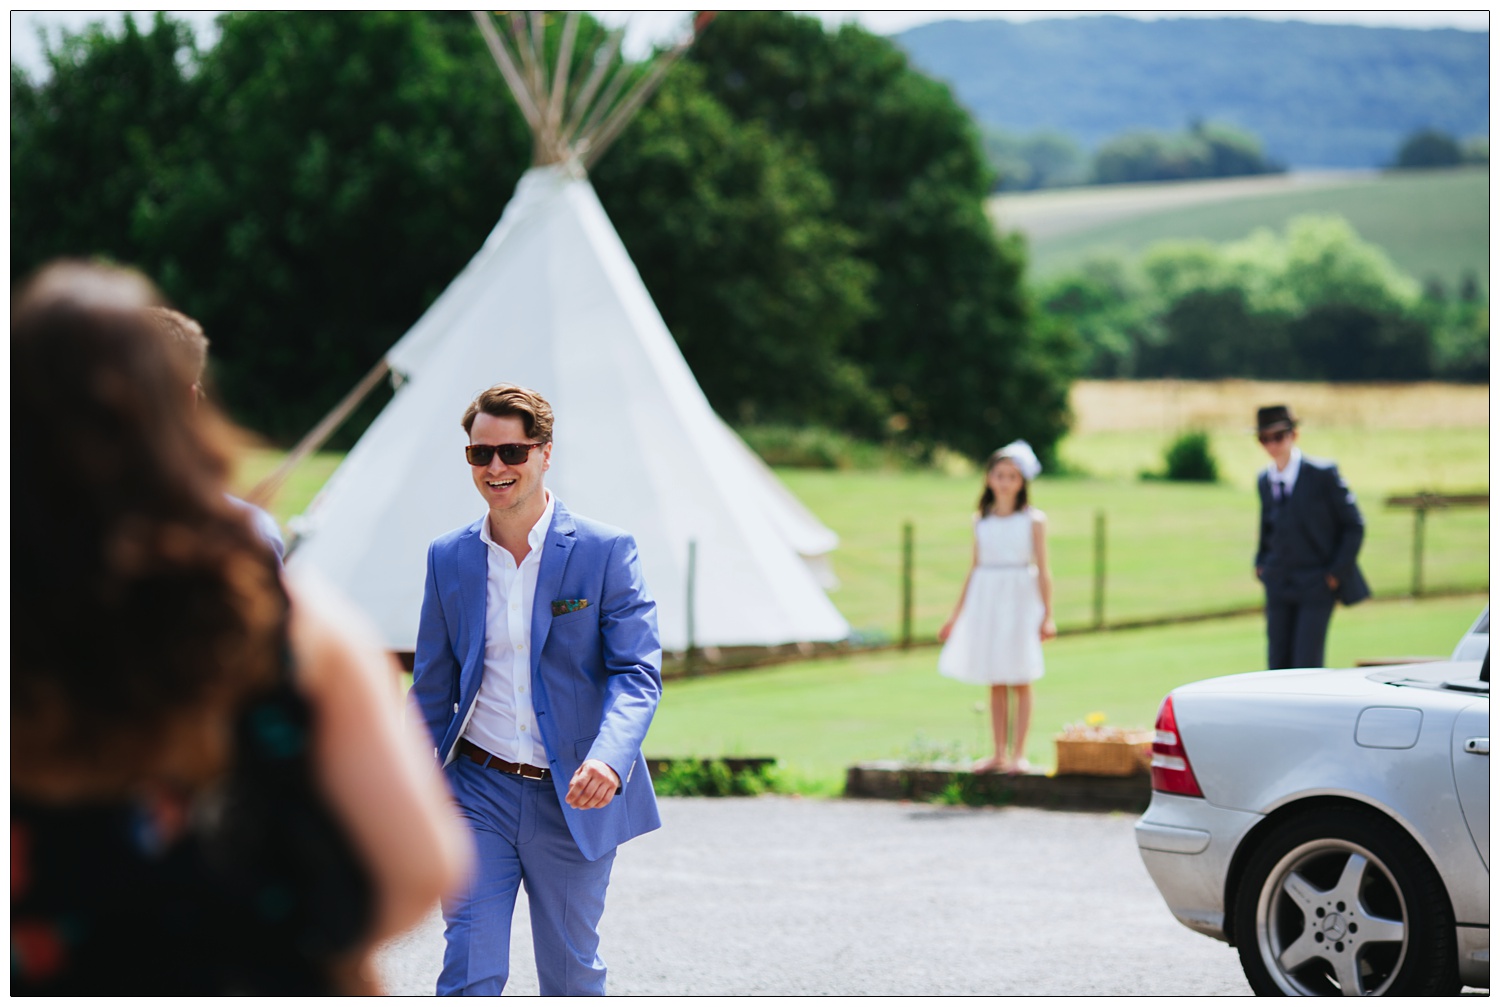 Man in blue suit and sunglasses walks in a car park. A tent and fields and trees behind him. And two children.